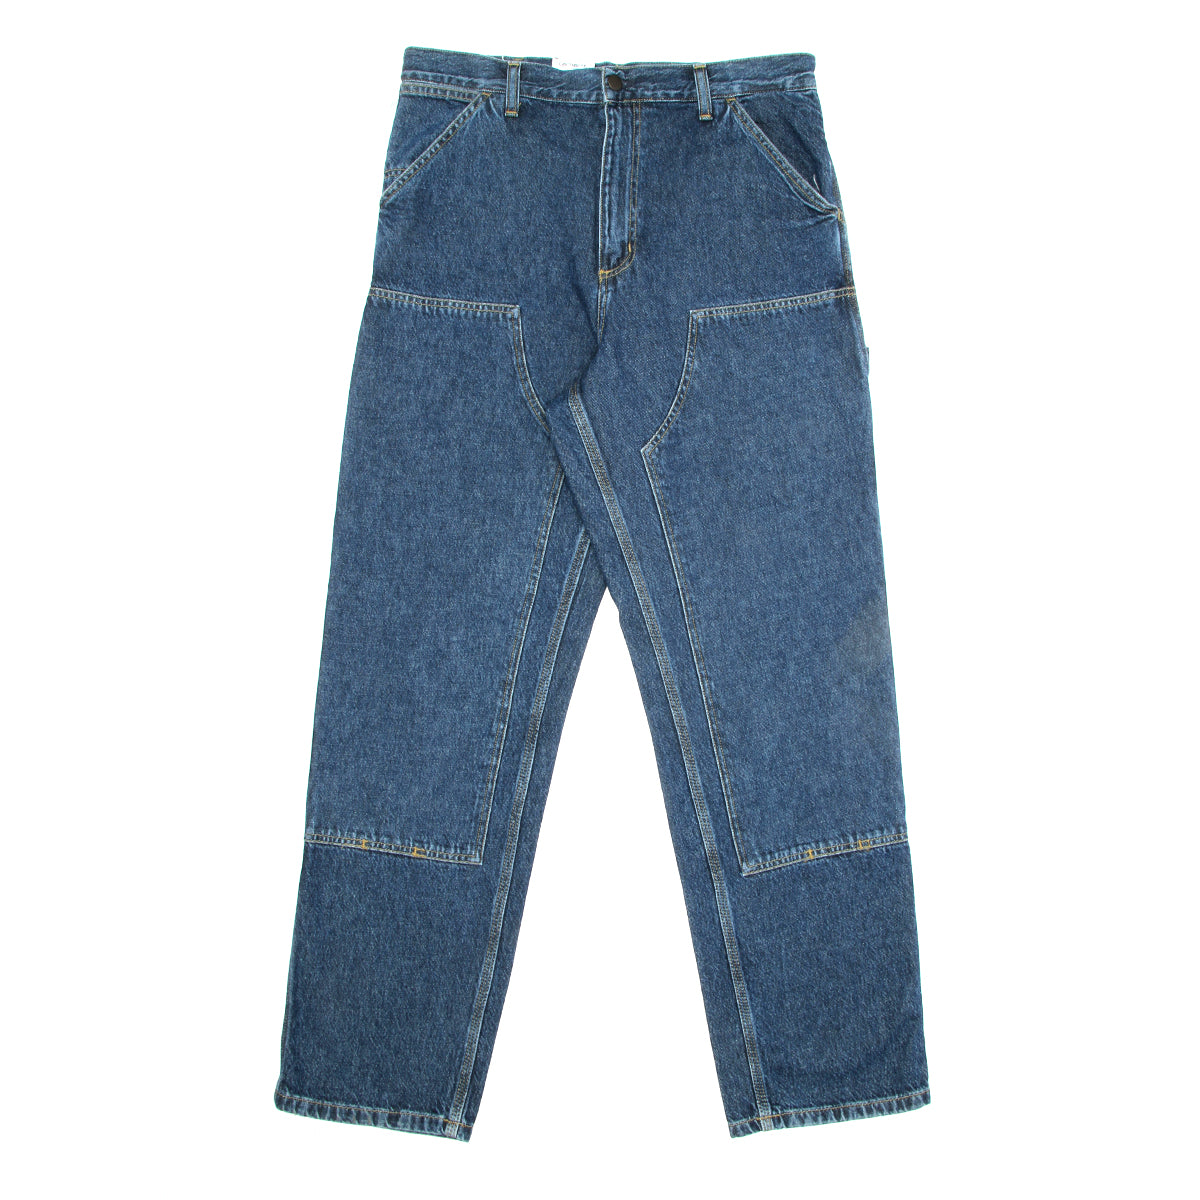 Carhartt WIP Double Knee Pant : Blue (Stone Washed)